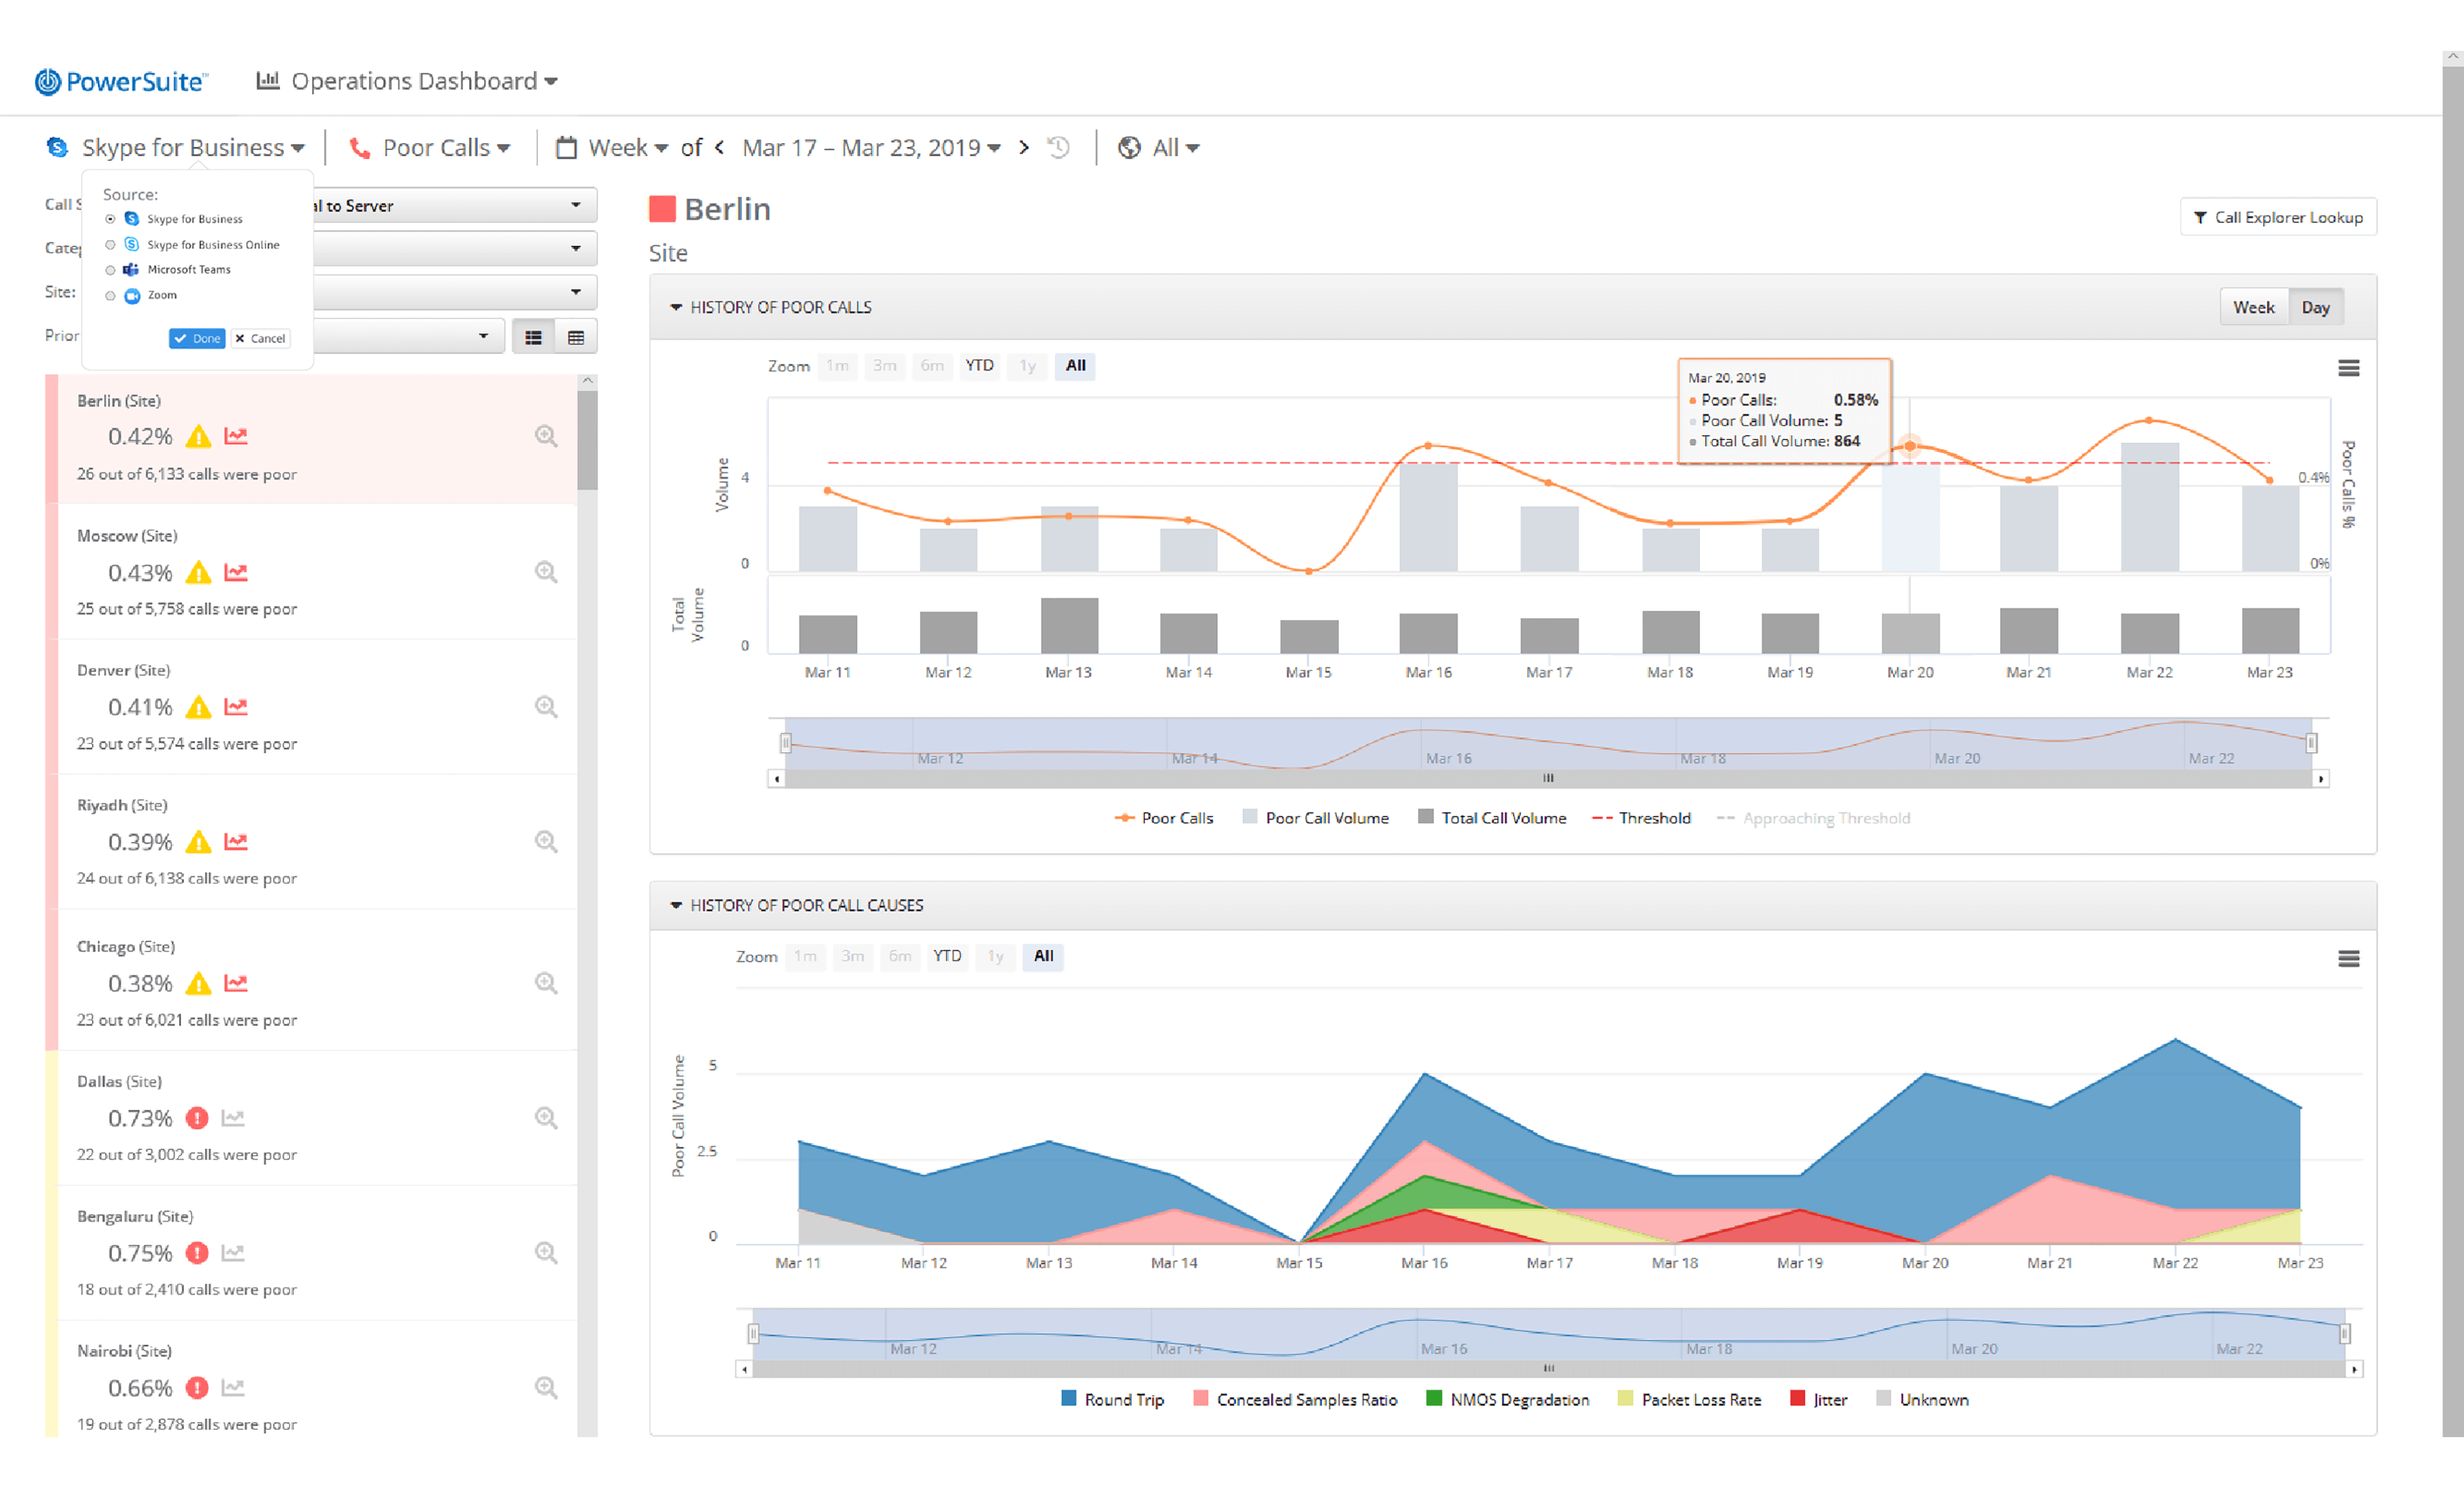 skype for business operations dashboard